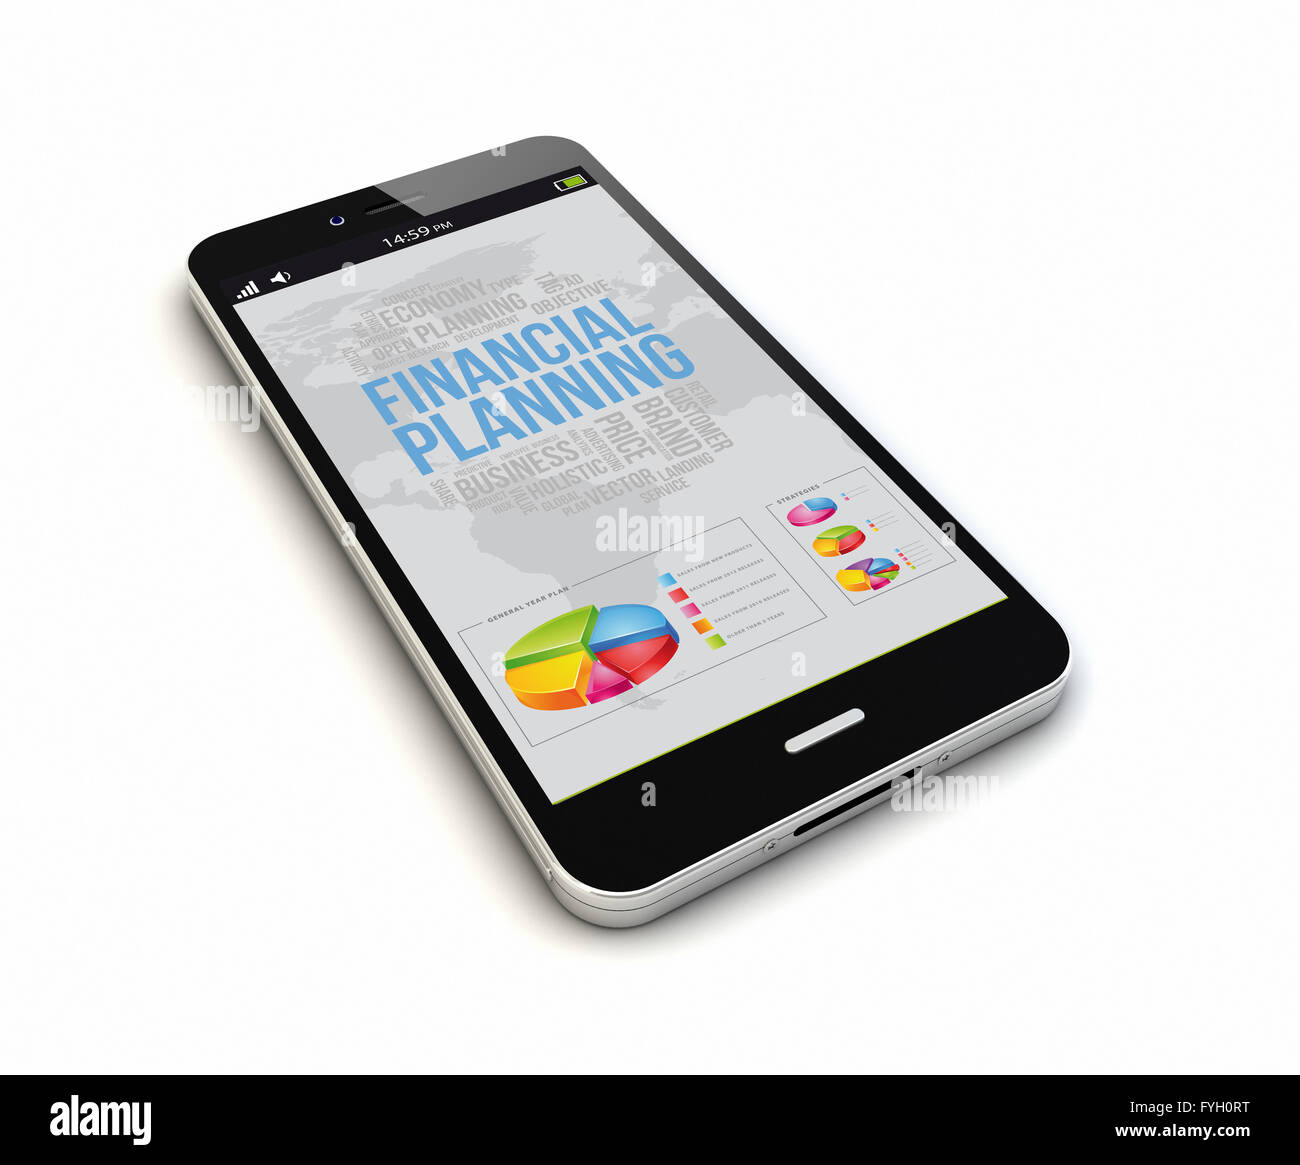 render of an original smartphone with financial planning on the screen. Screen graphics are made up. Stock Photo